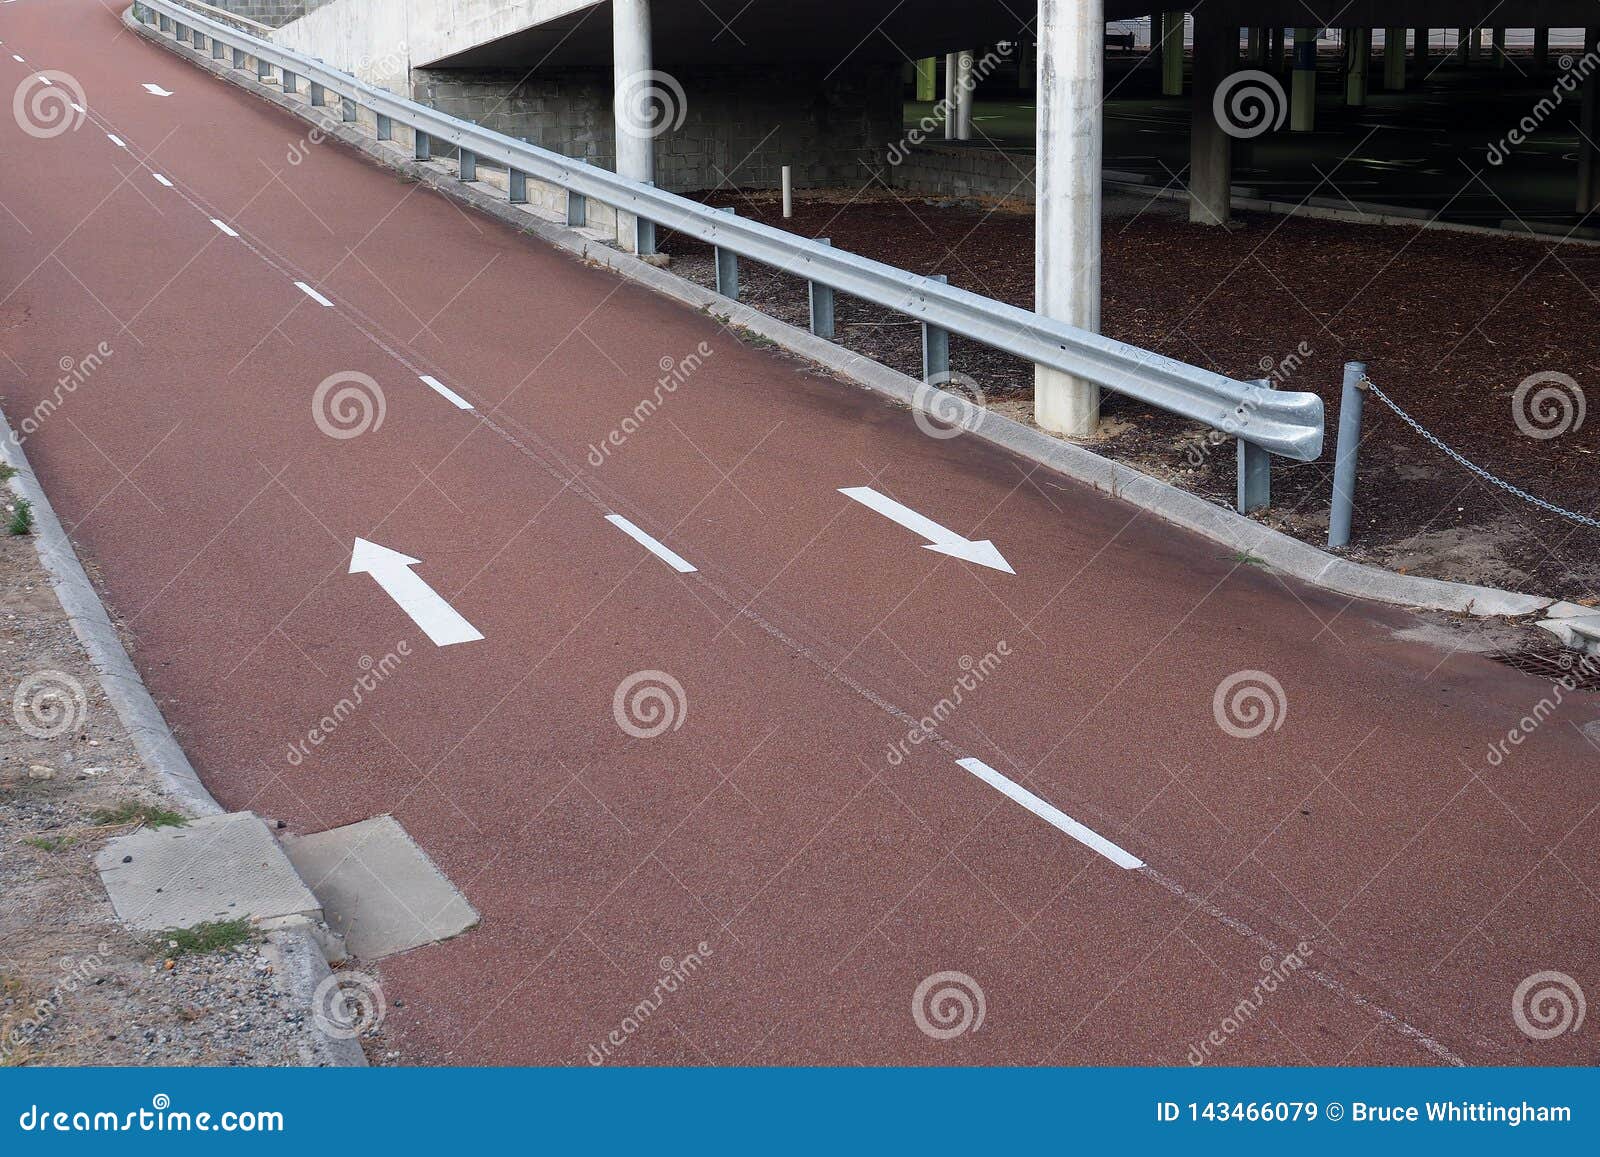 Dark Red Tarmac Bike Zpath or Road Stock Image - Image of direction ...